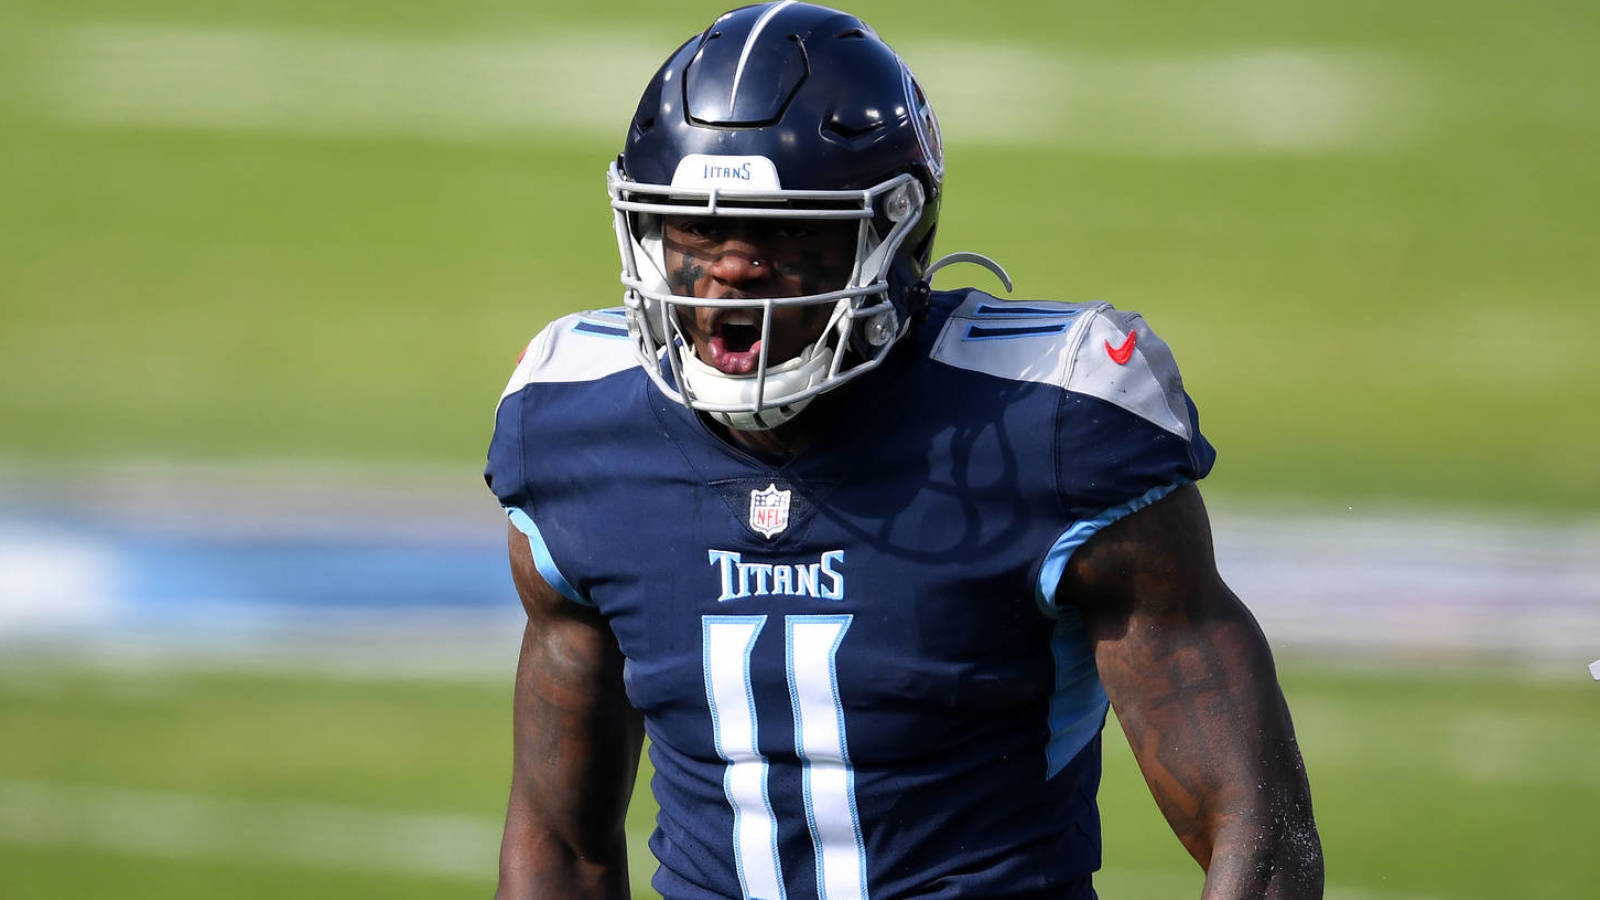 Jones turned down Brown's offer to wear No. 11 with Titans